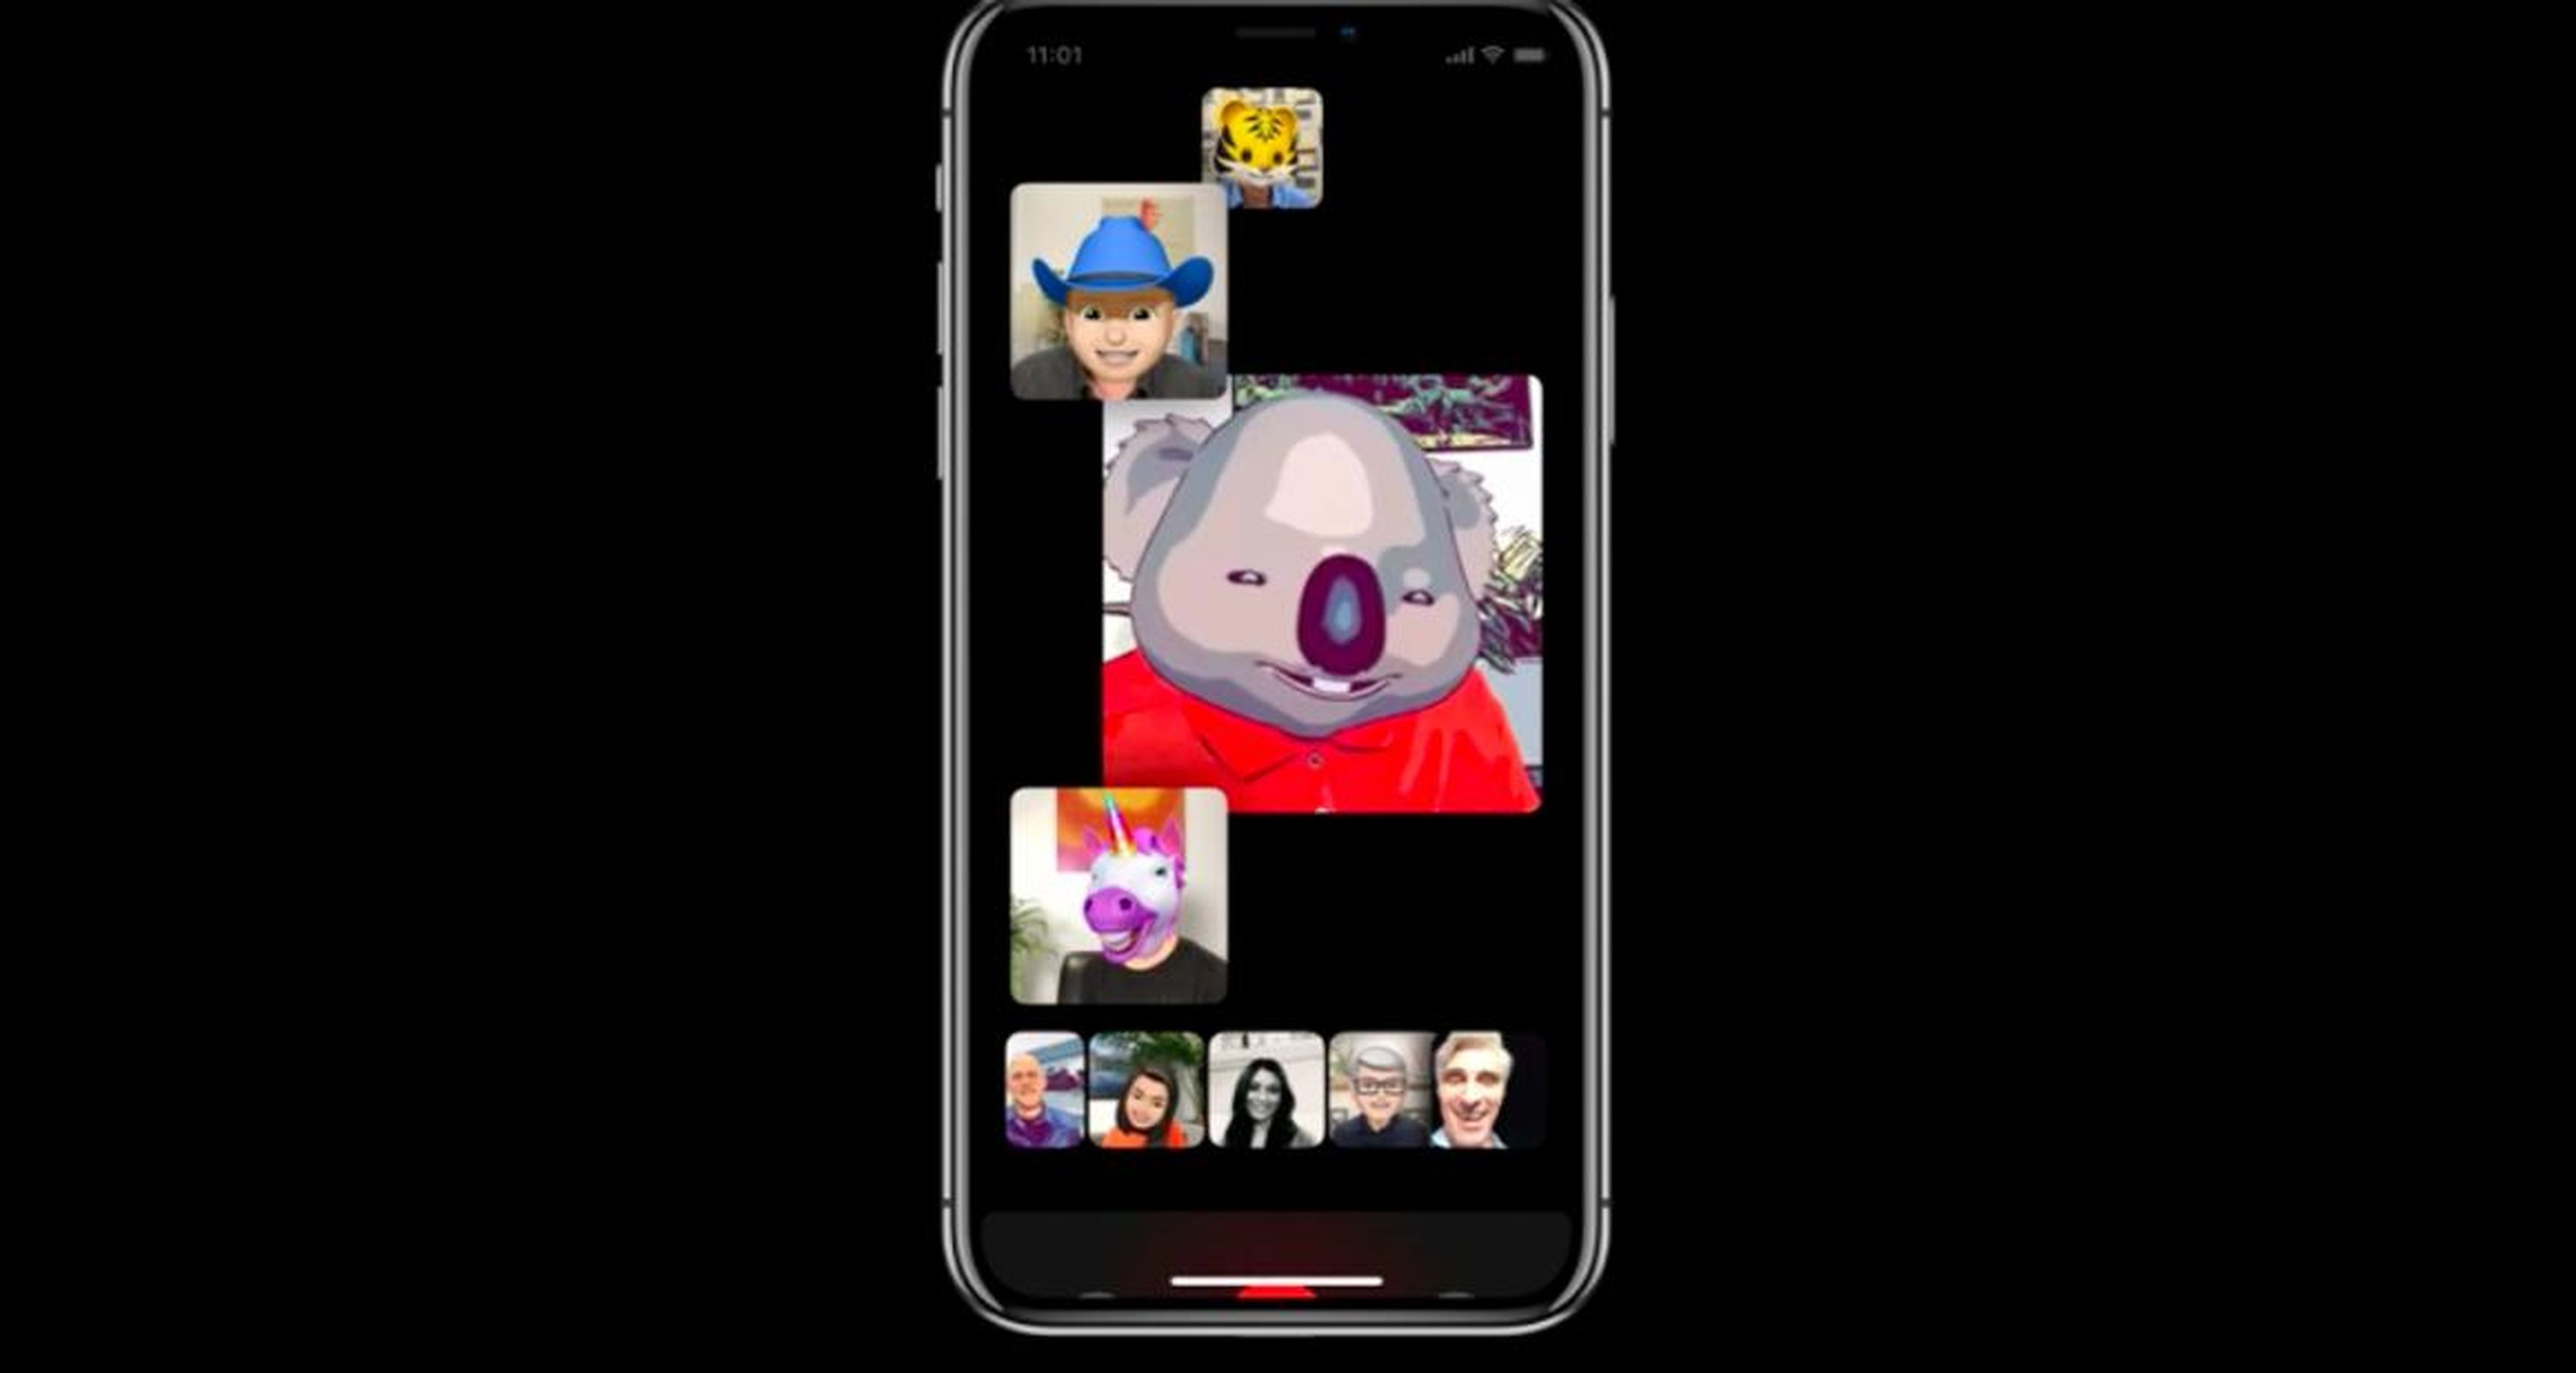 15. FaceTime is getting a huge upgrade in iOS 12 with the introduction of "Group FaceTime," which can support up to 32 simultaneous participants. You can also add stickers, filters, and Animoji to your FaceTimes. Unfortunately, it